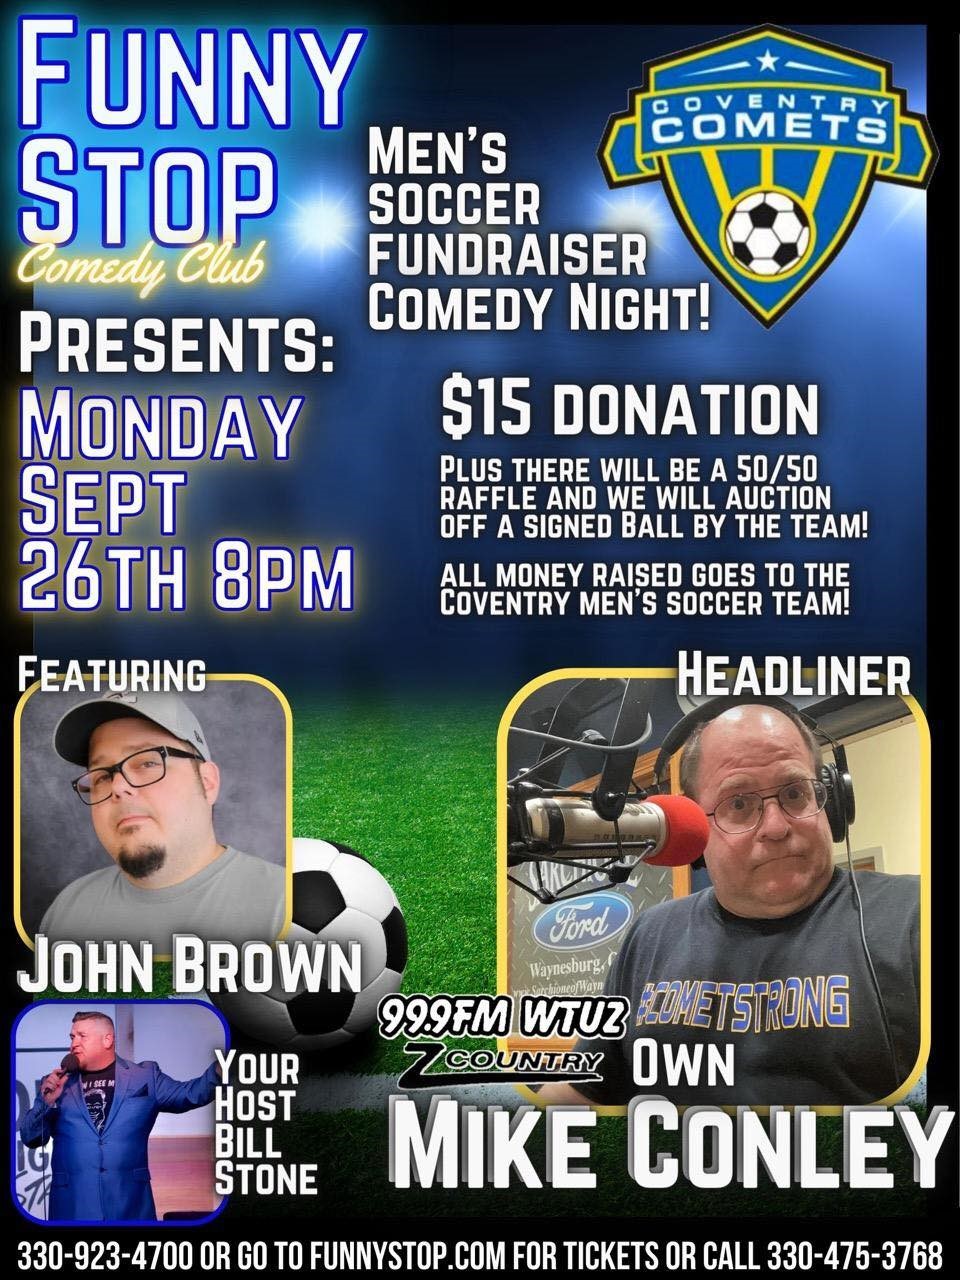 Men's Soccer Fundraiser Comedy Night! Mike Conley, Bill Stone, John Brown at Funny Stop Comedy Club on Sep 26, 20:00@Funny Stop Comedy Club - Buy tickets and Get information on Funny Stop funnystop.online